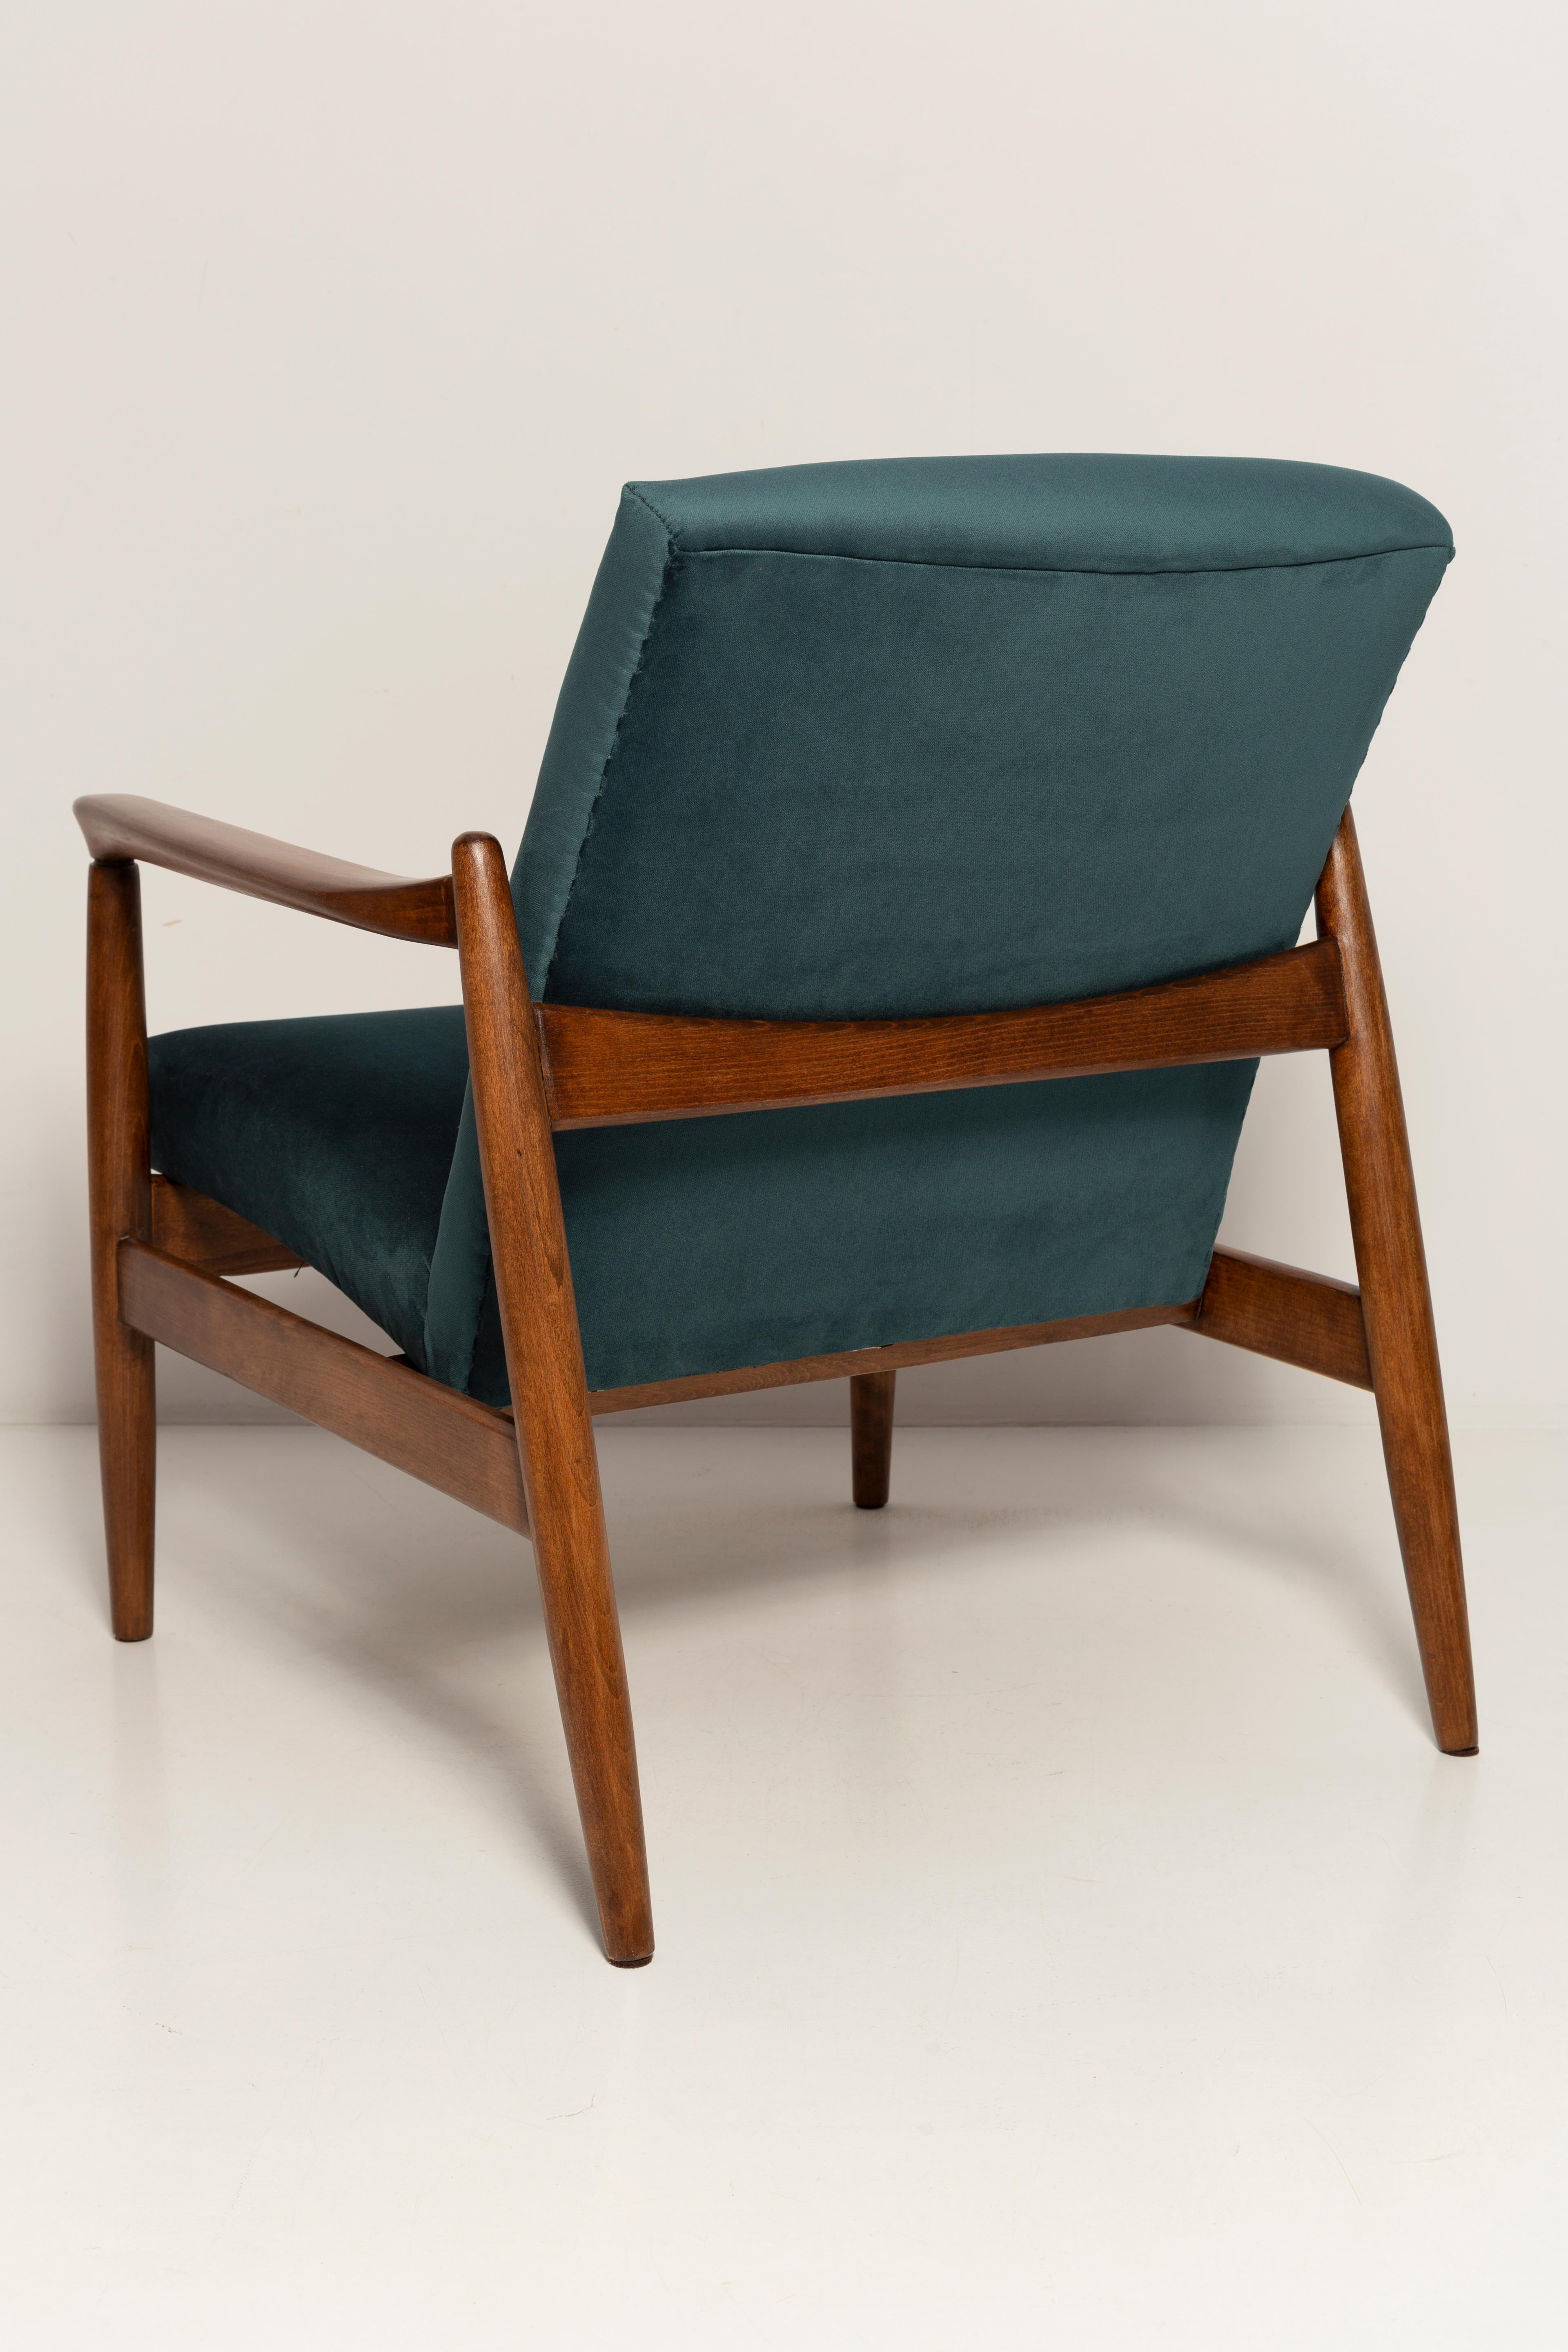 Set of Petrol Blue Vintage Armchair and Stool, Edmund Homa, 1960s For Sale 2